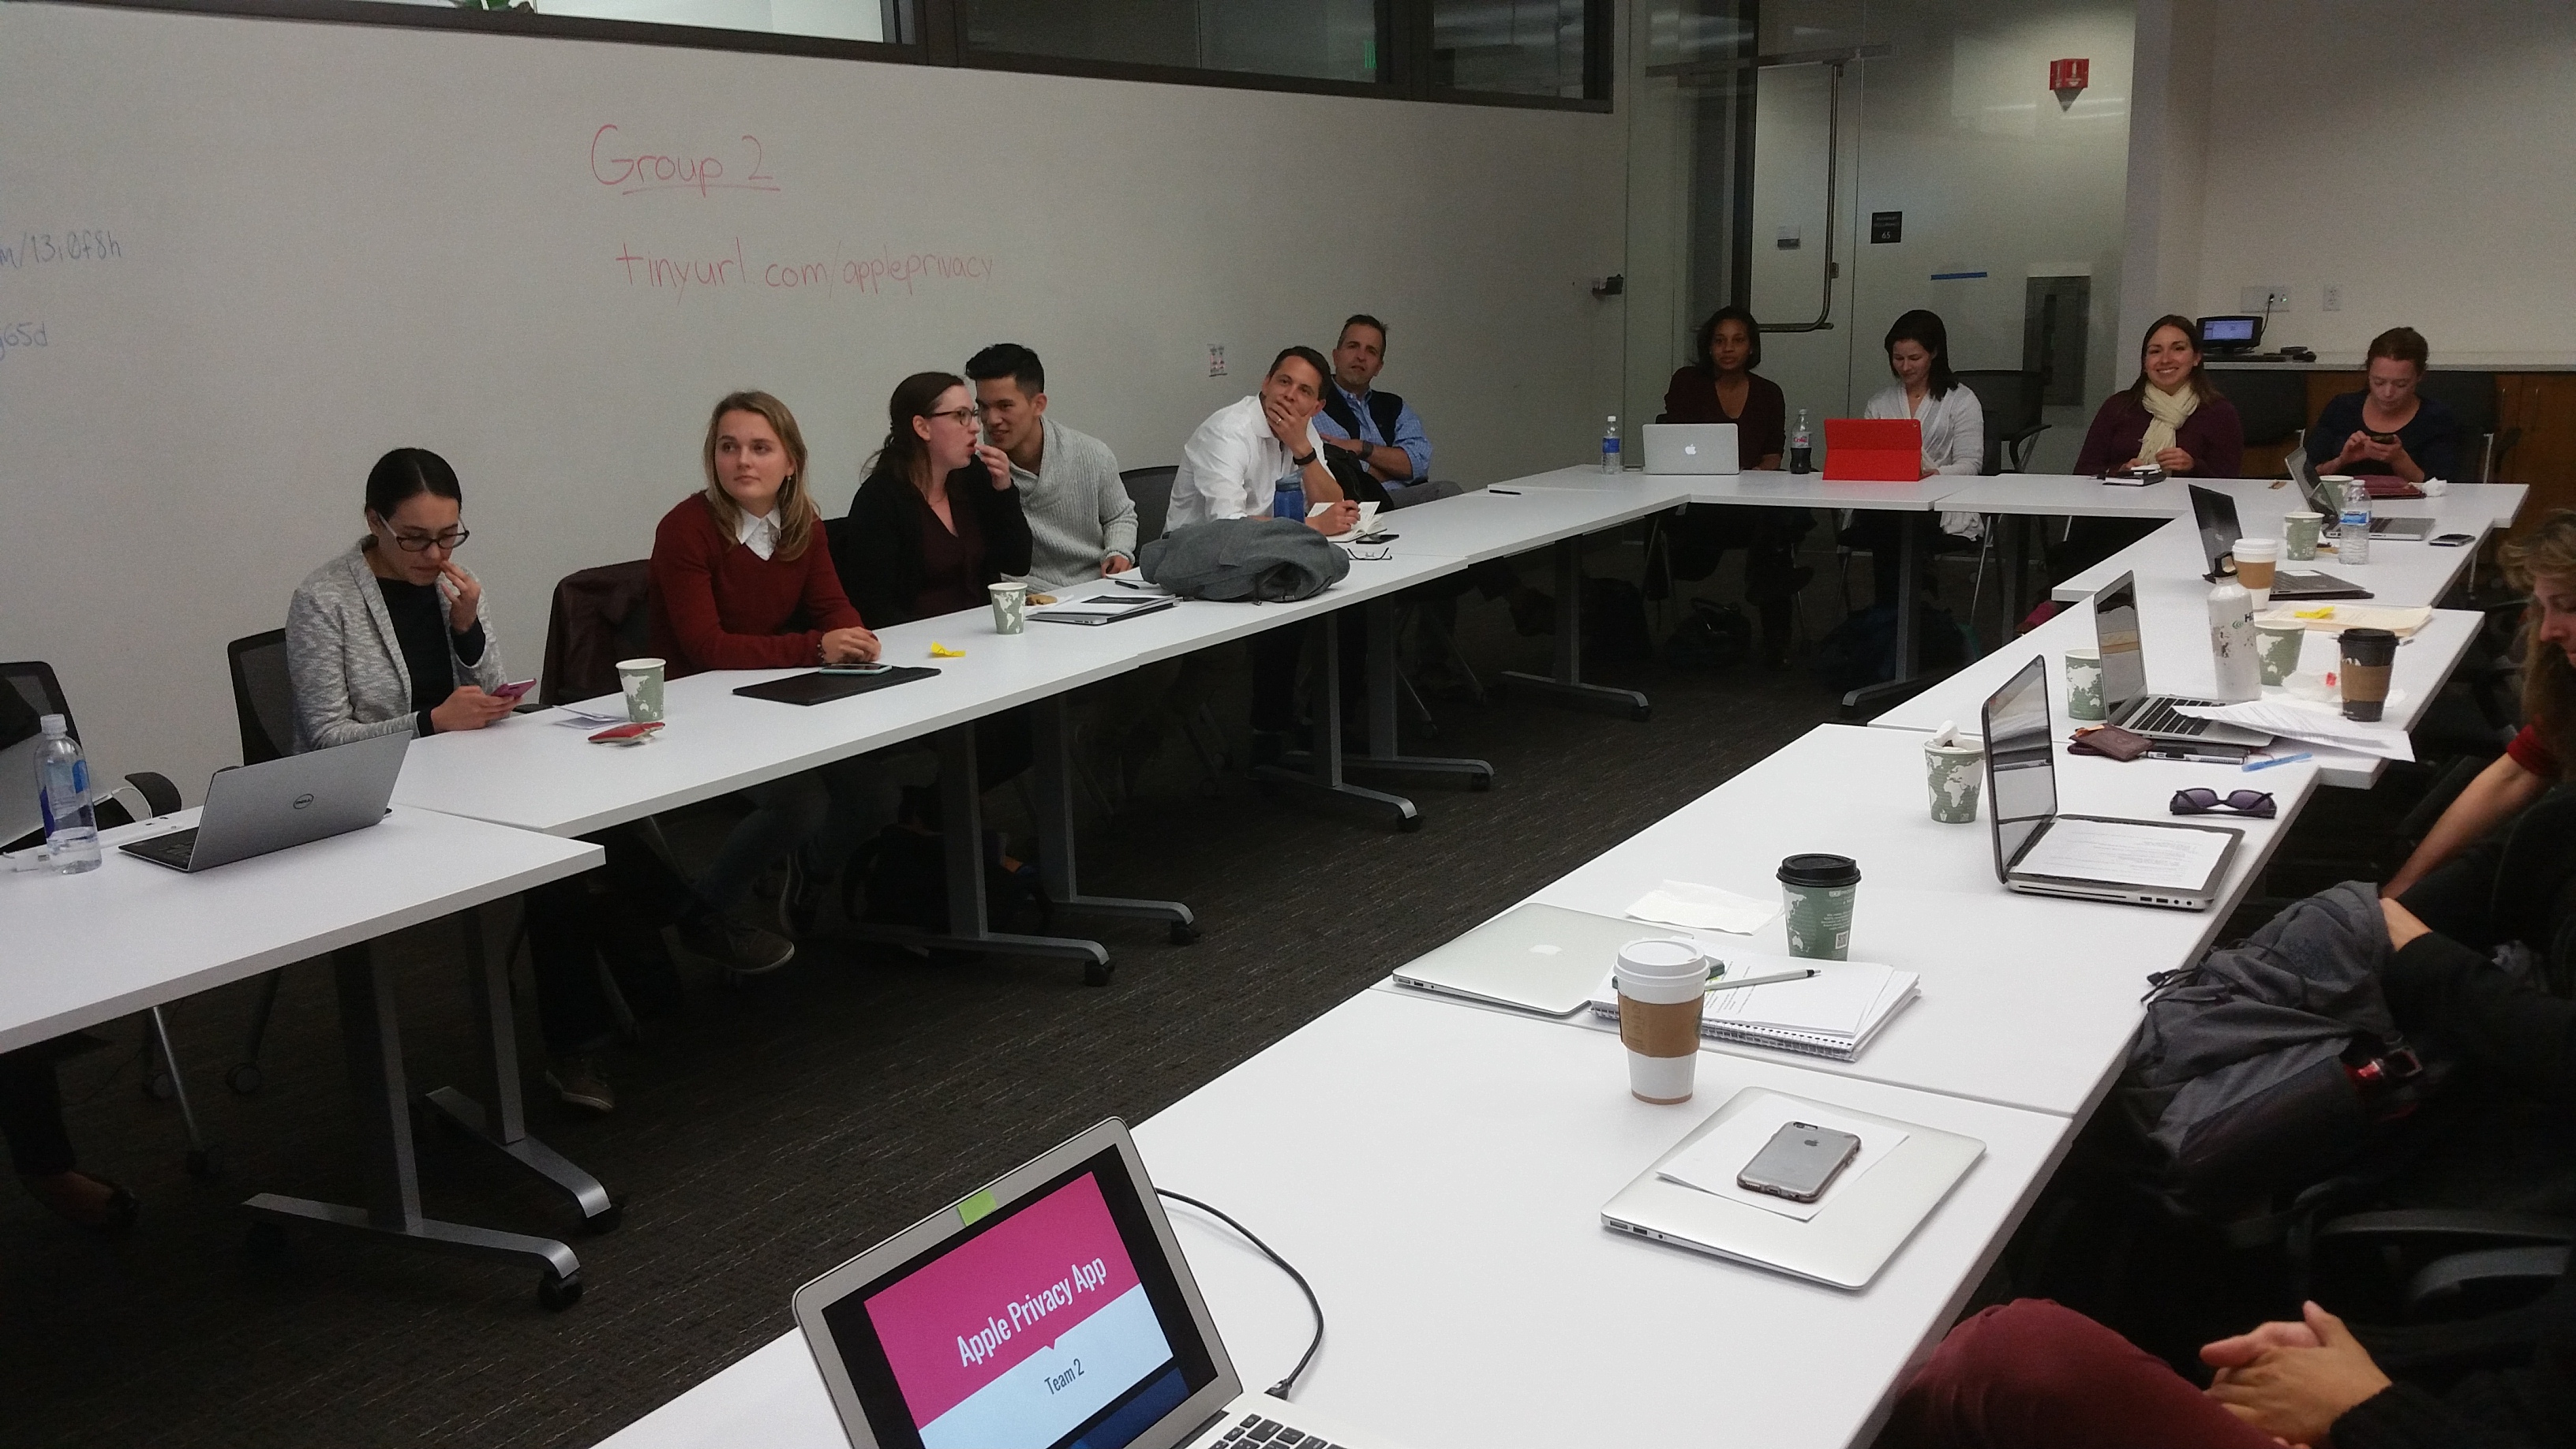 Legal design lab class on privacy policy design